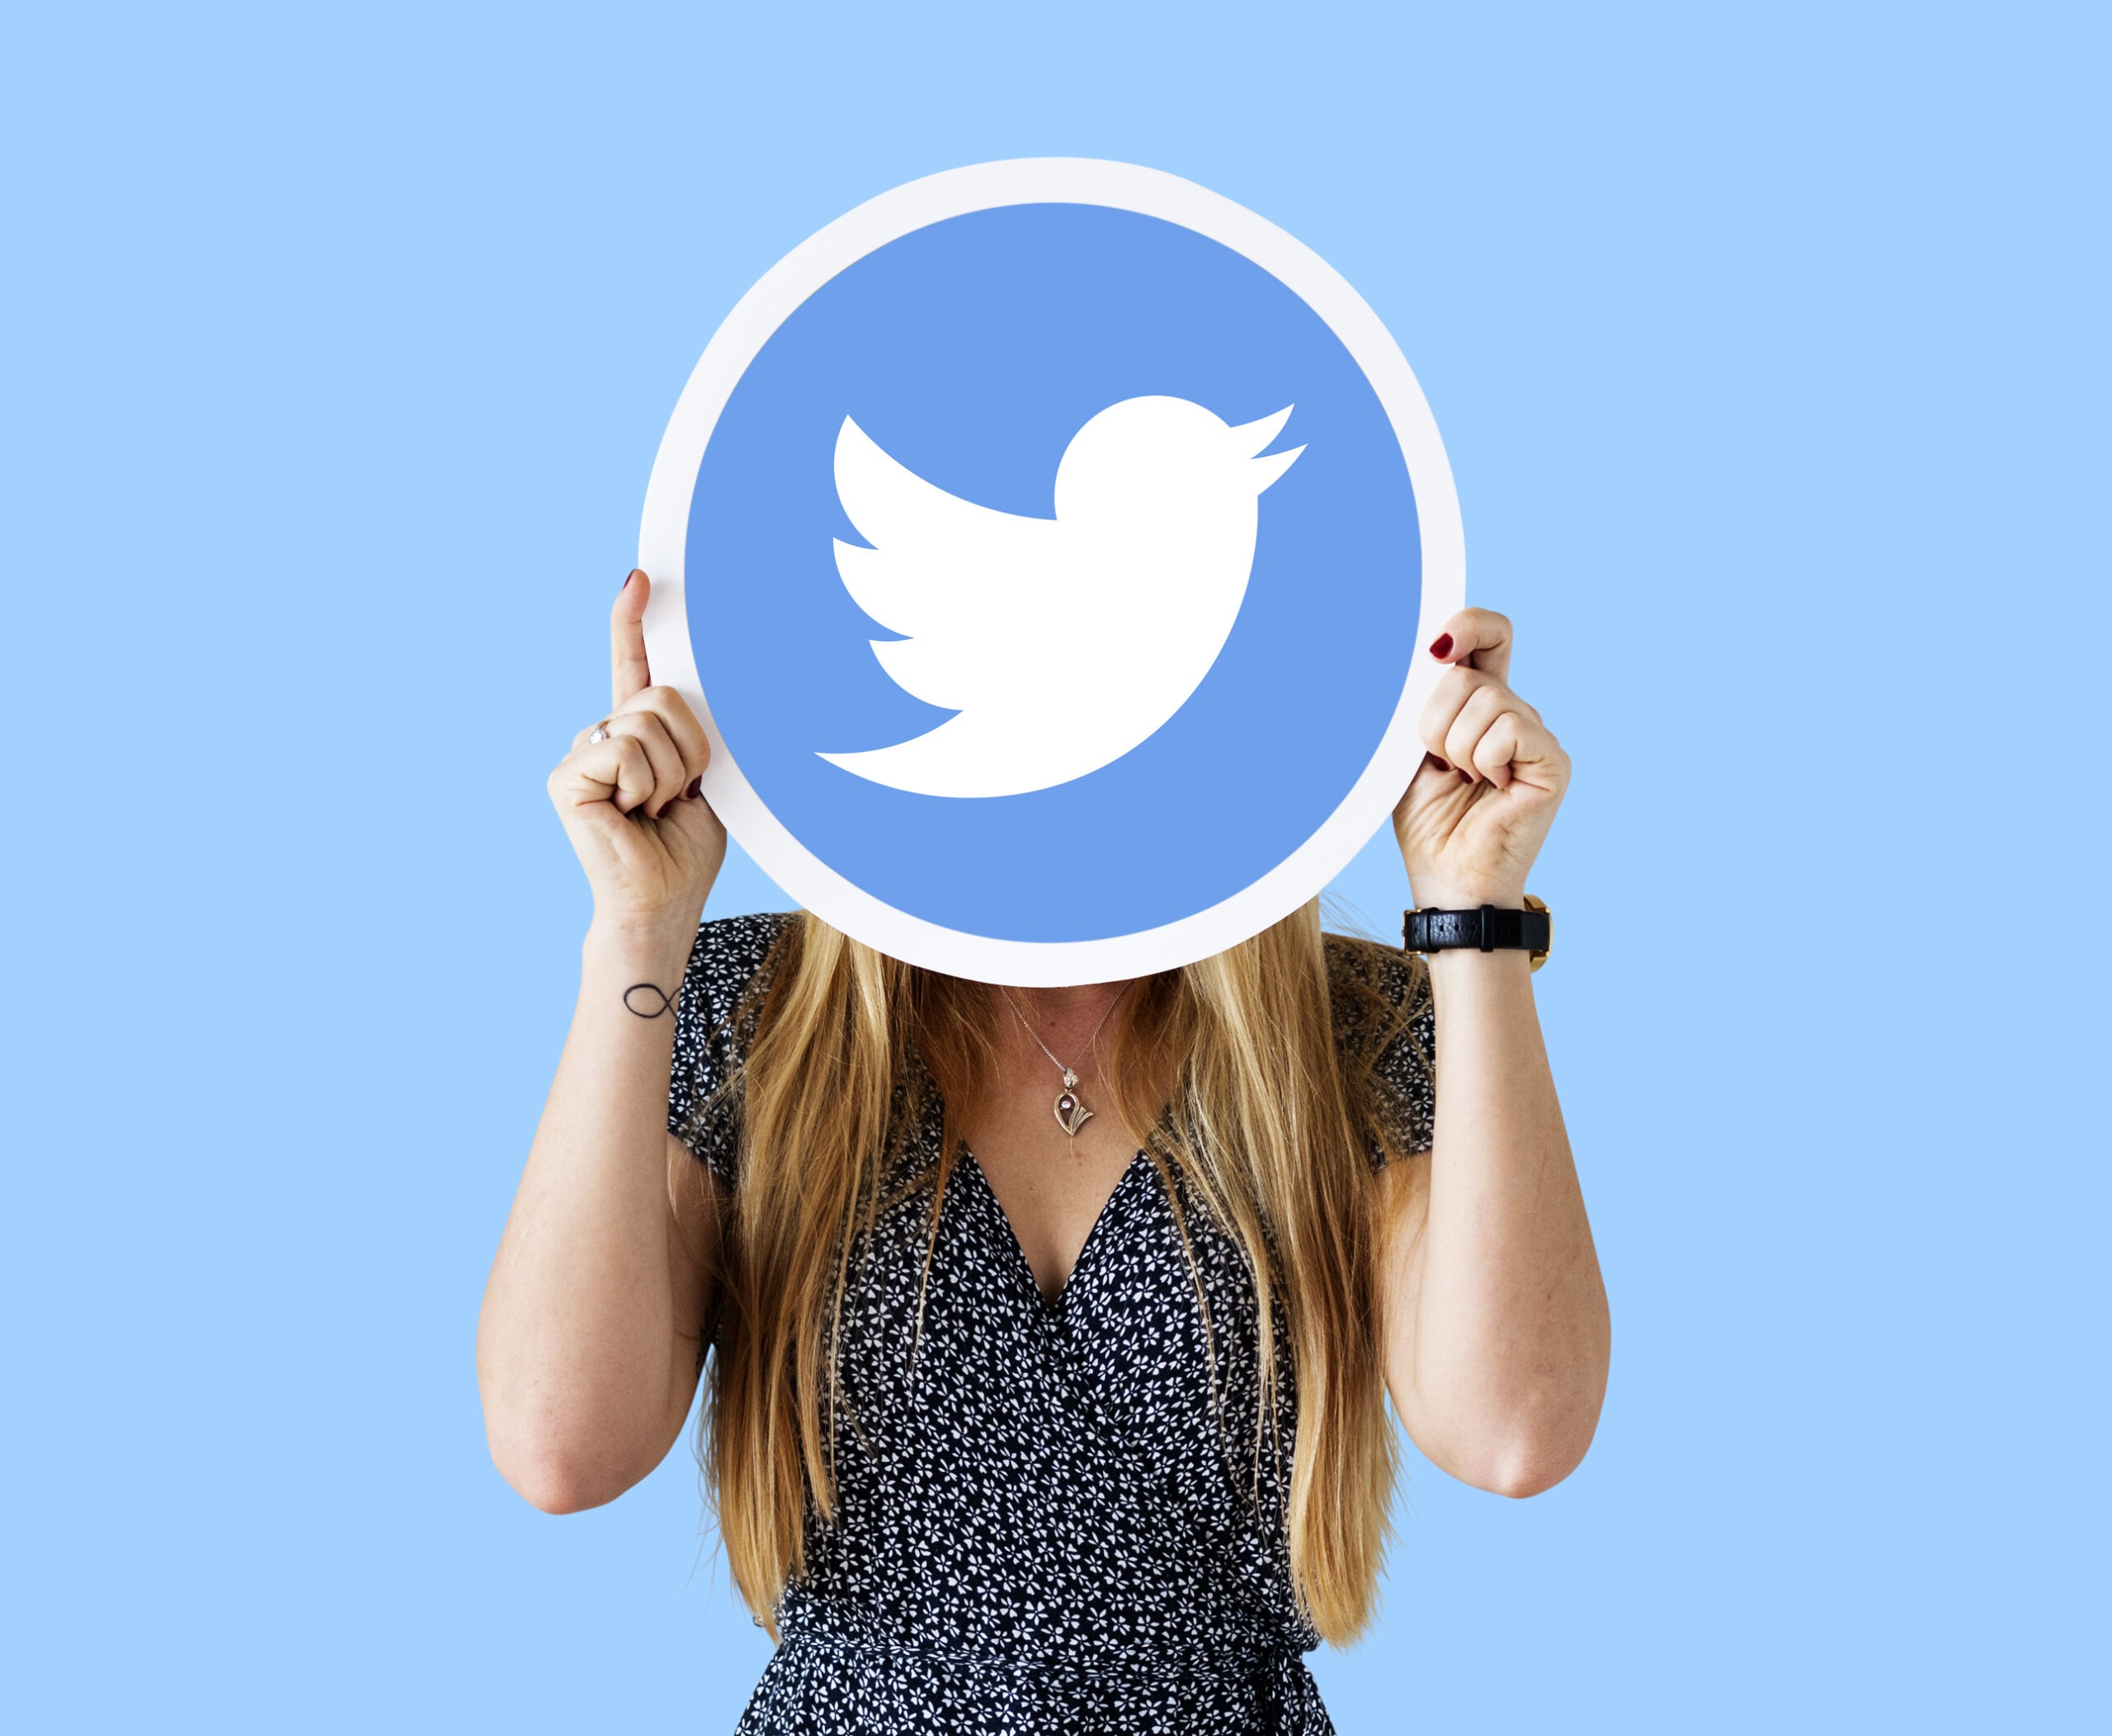 Woman covering her face with a large rounded Twitter logo